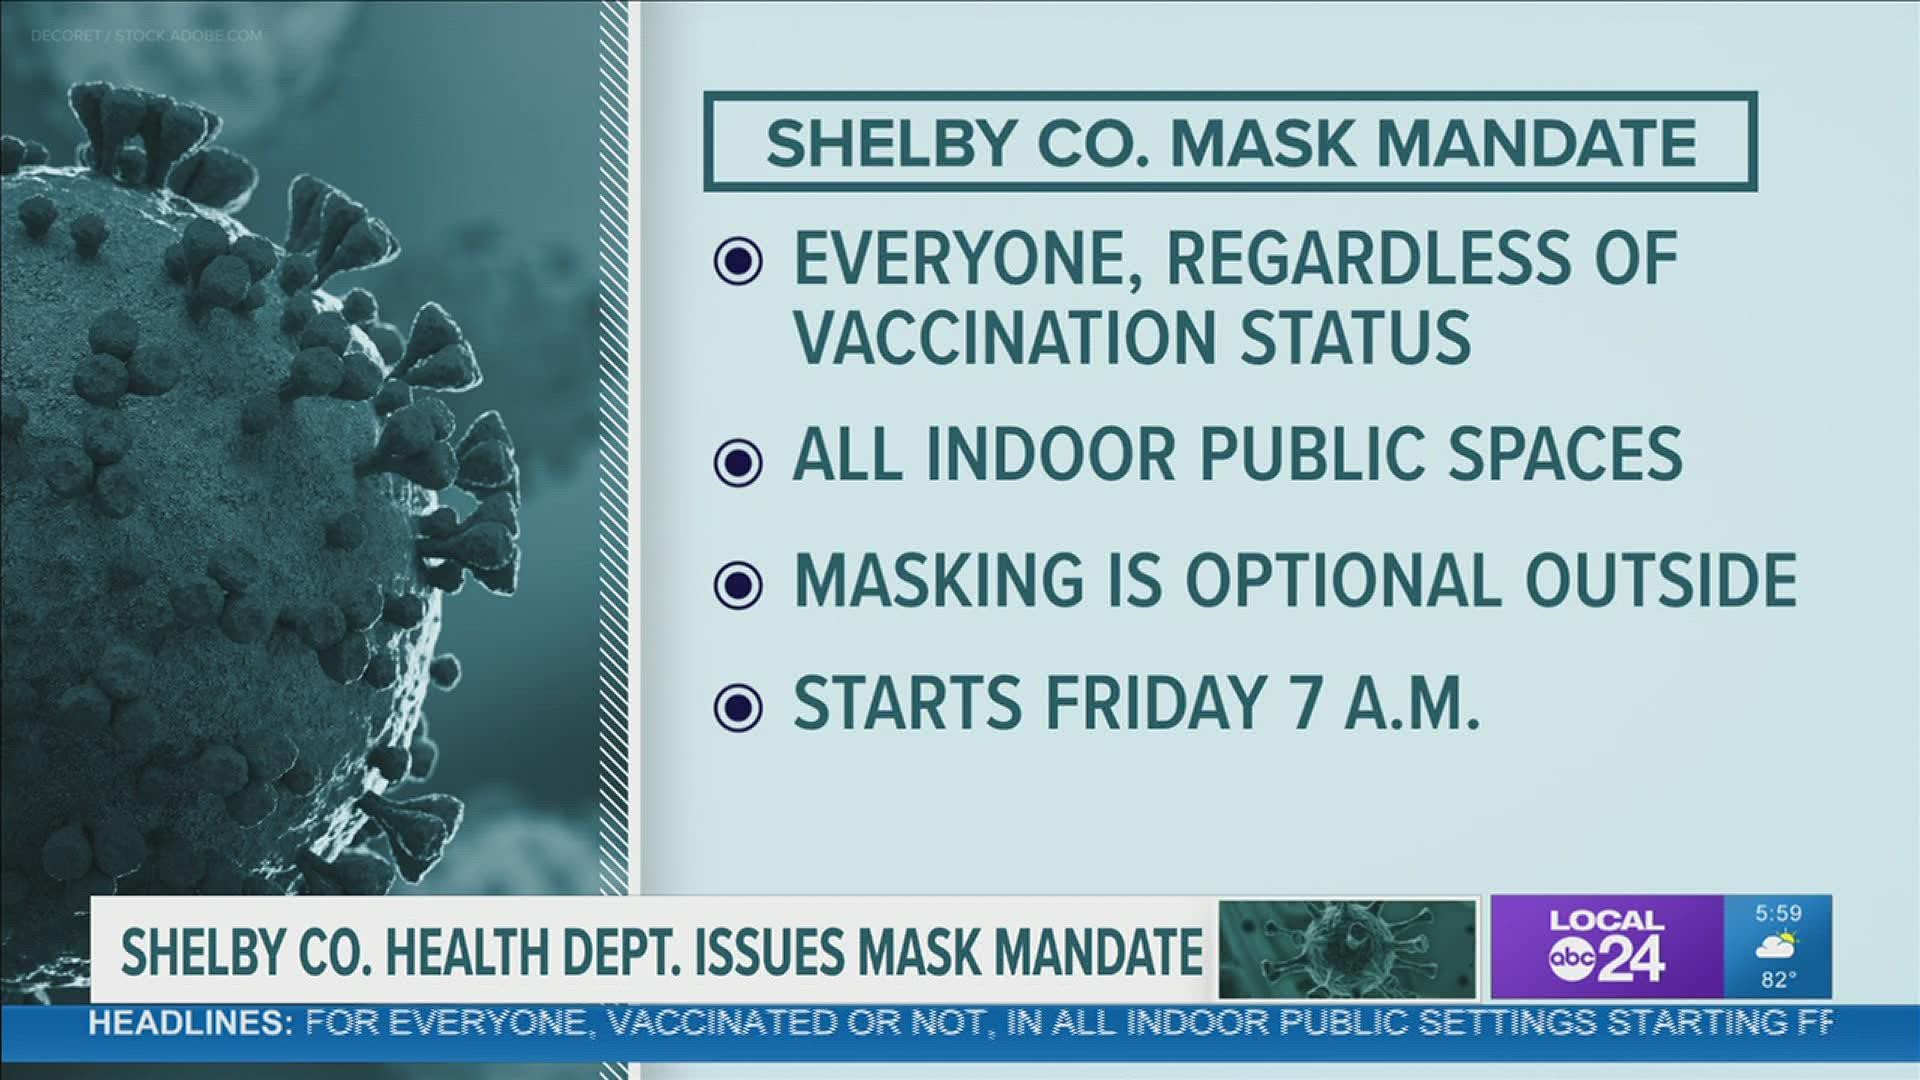 Dr. Michelle Taylor told commissioners a universal mask mandate needed to happen quickly to slow the COVID-19 transmission rate in Shelby County.